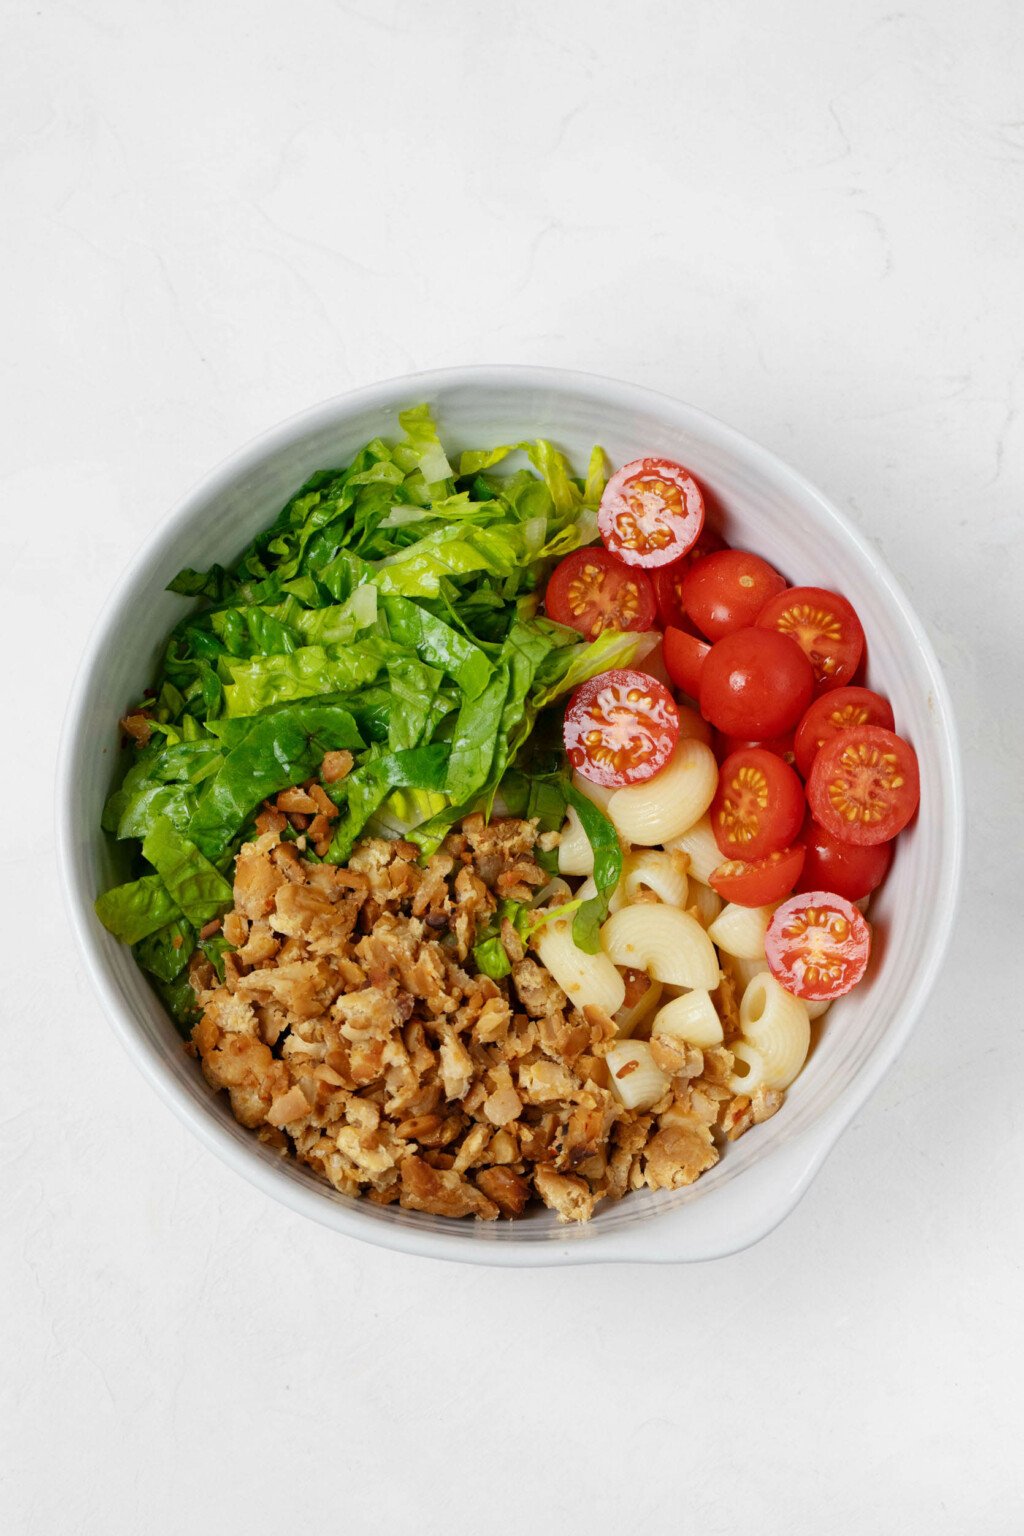 A large, round white mixing bowl is filled with tomatoes, tempeh bacon, cooked pasta, and chopped romaine lettuce.